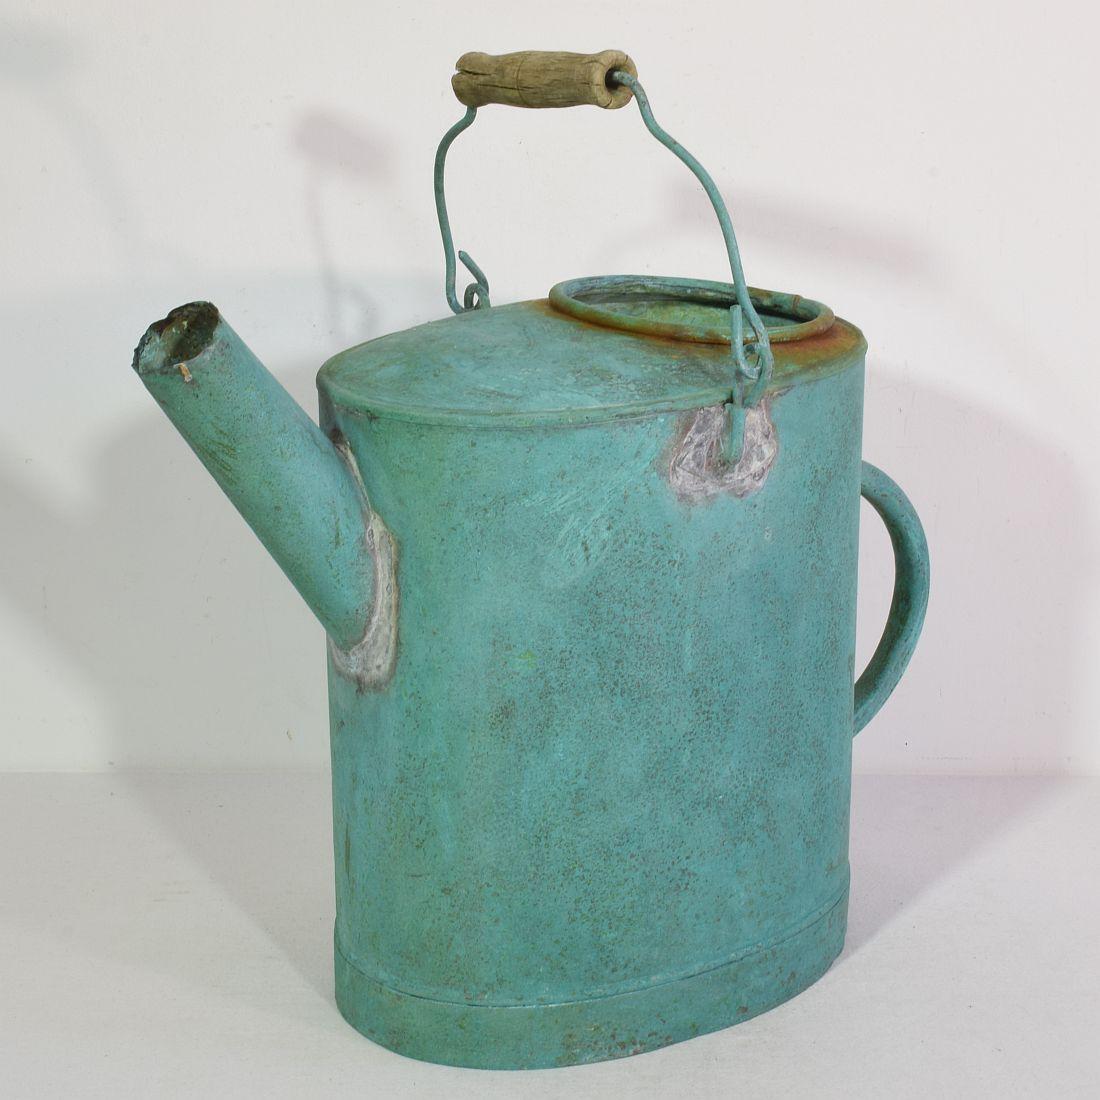 Stunning copper watering can with great green patina, France, circa 1850-1900. Weathered and small losses.
Great to use as a decorative object in or outside. Might have leaks.